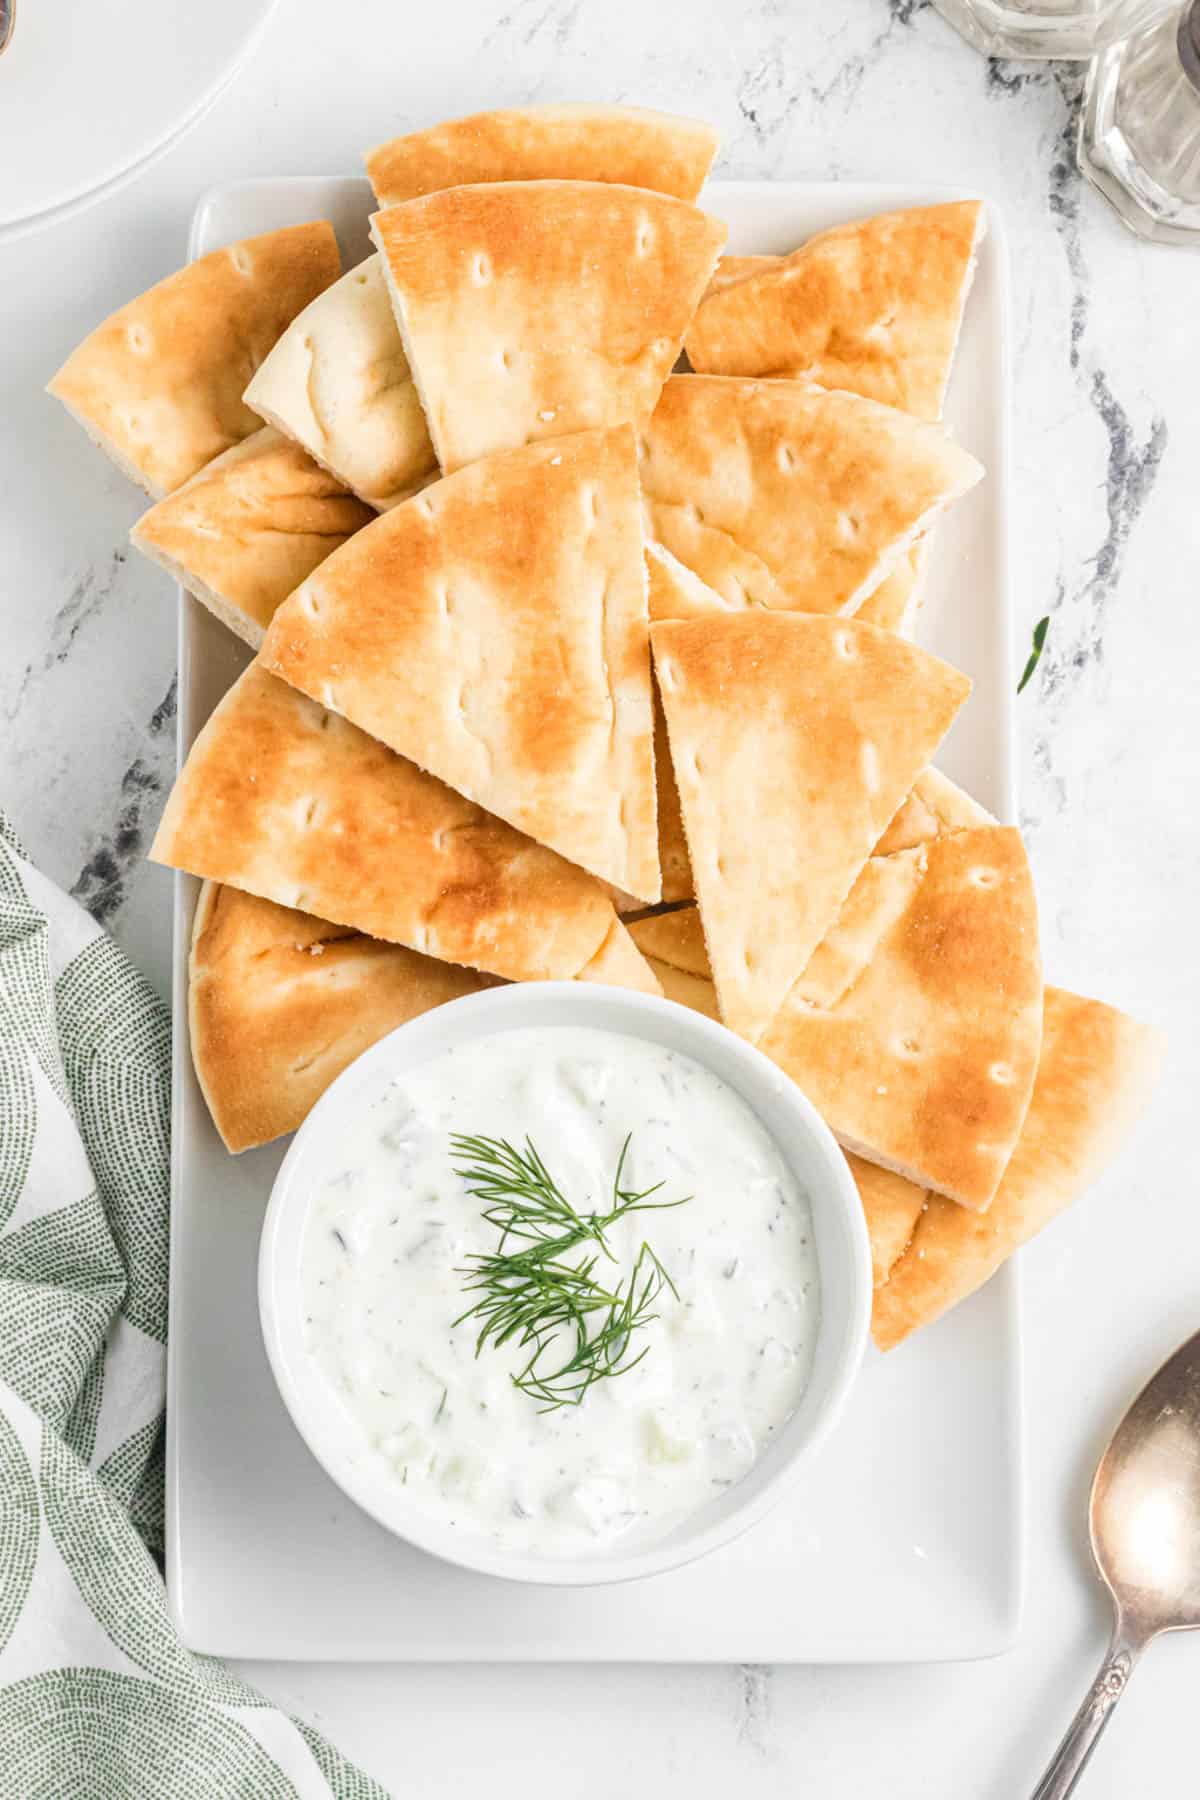 A serving platter with a bowl of tzatziki sauce for dipping and soft pita bread wedges.